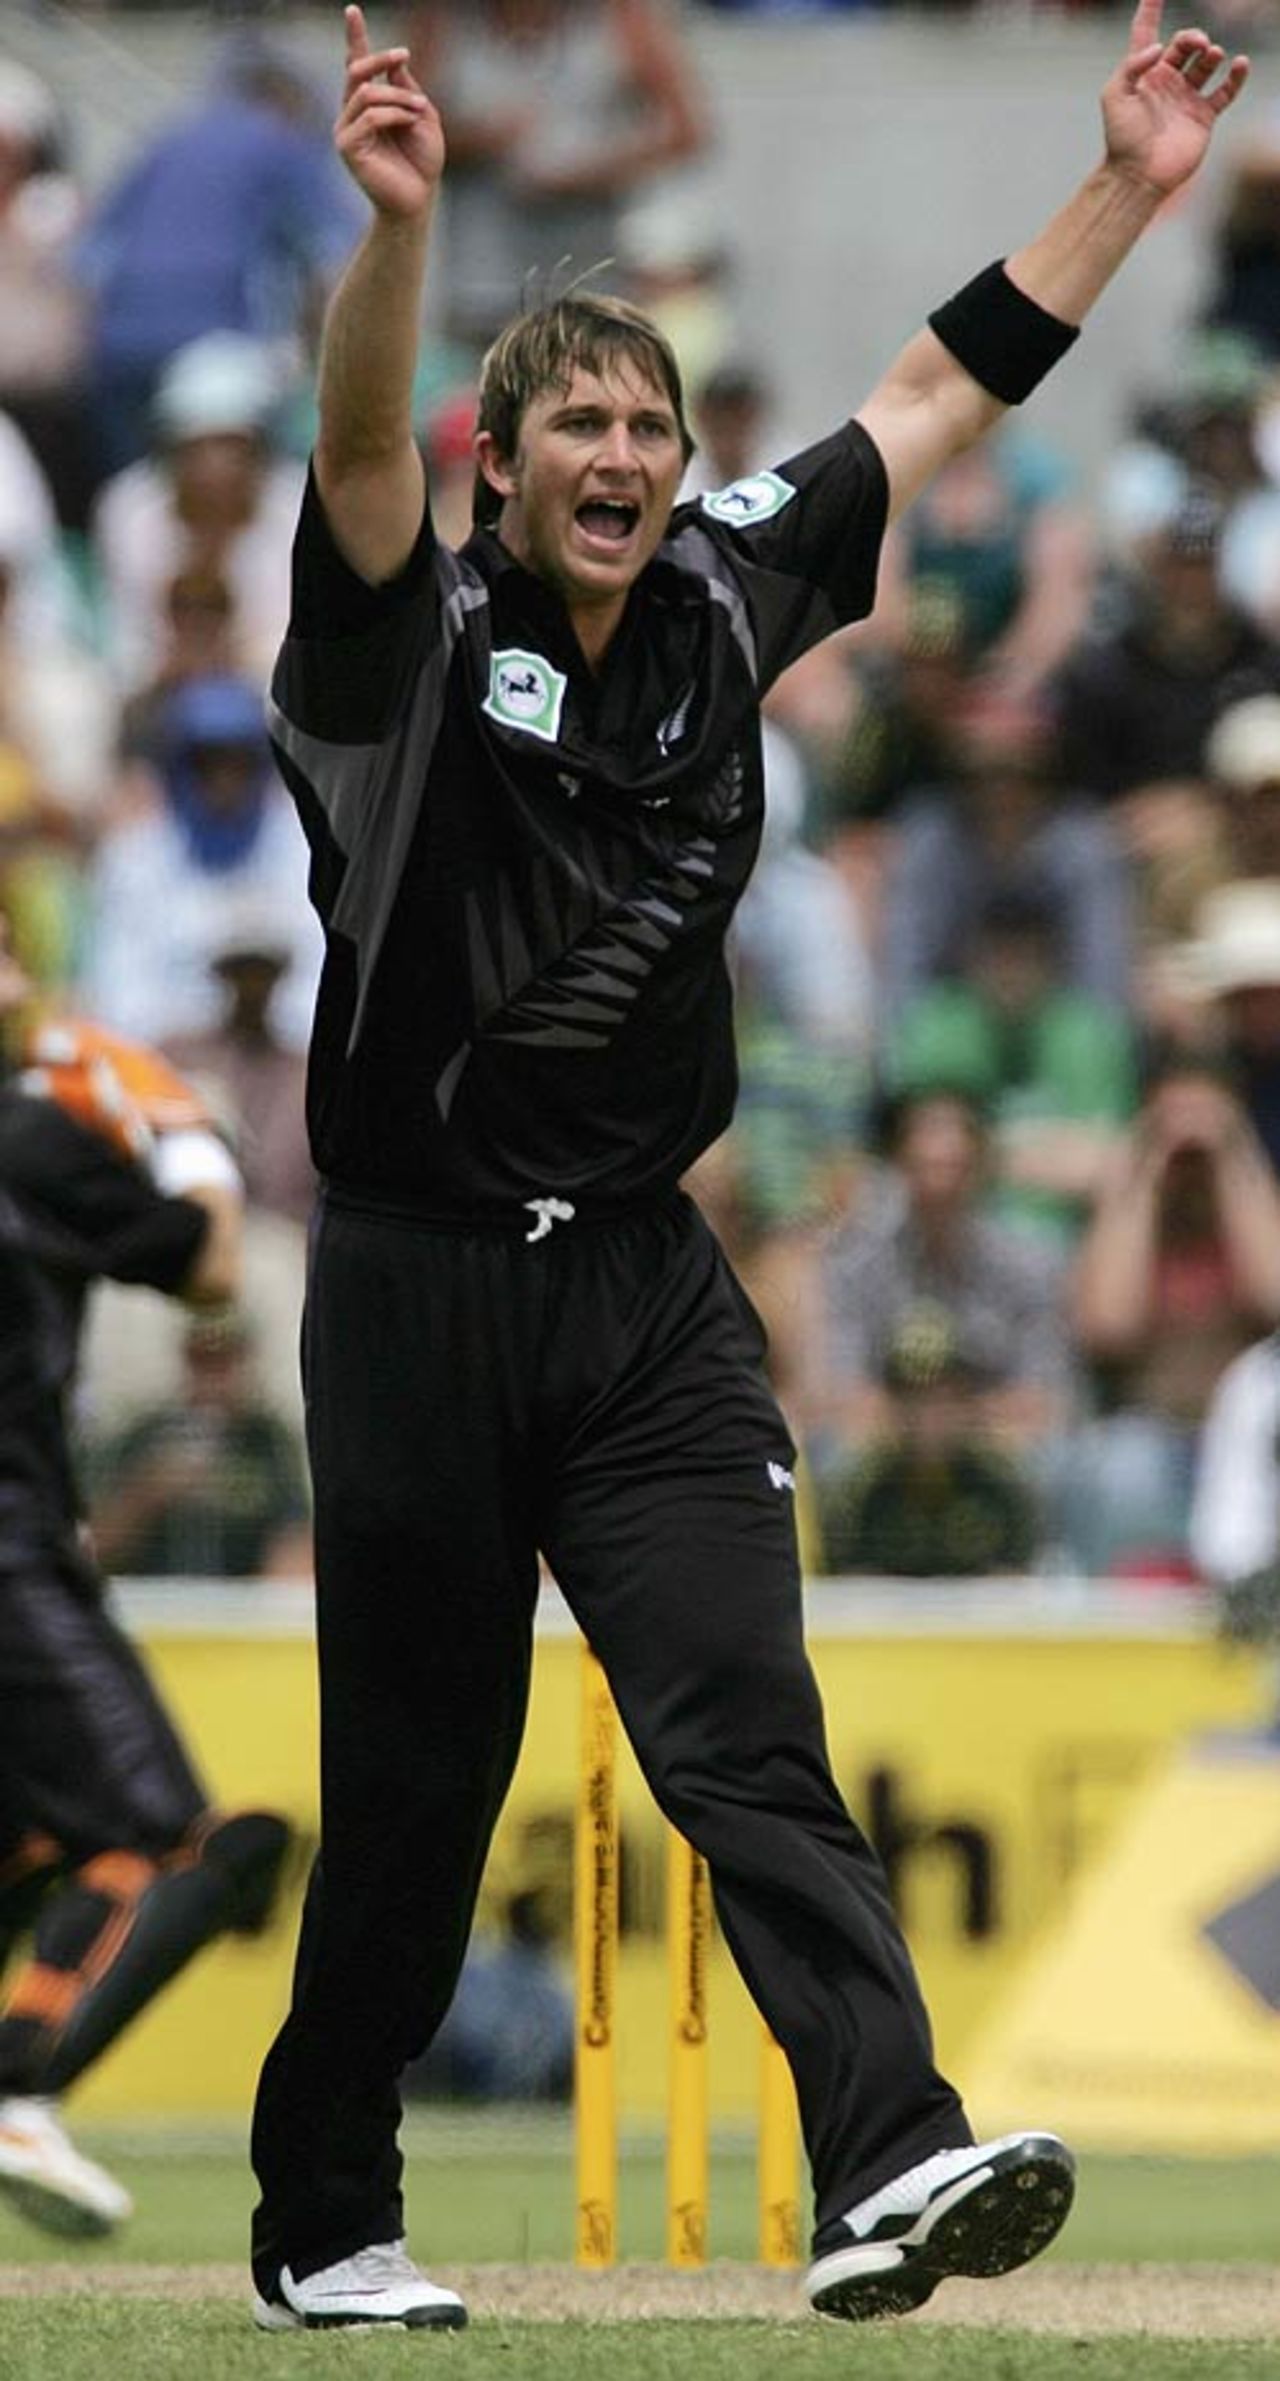 Shane Bond celebrates having Andrew Symonds caught behind, the second wicket of his hat-trick, Australia v New Zealand, CB Series, 2nd match, Hobart, January 14, 2007